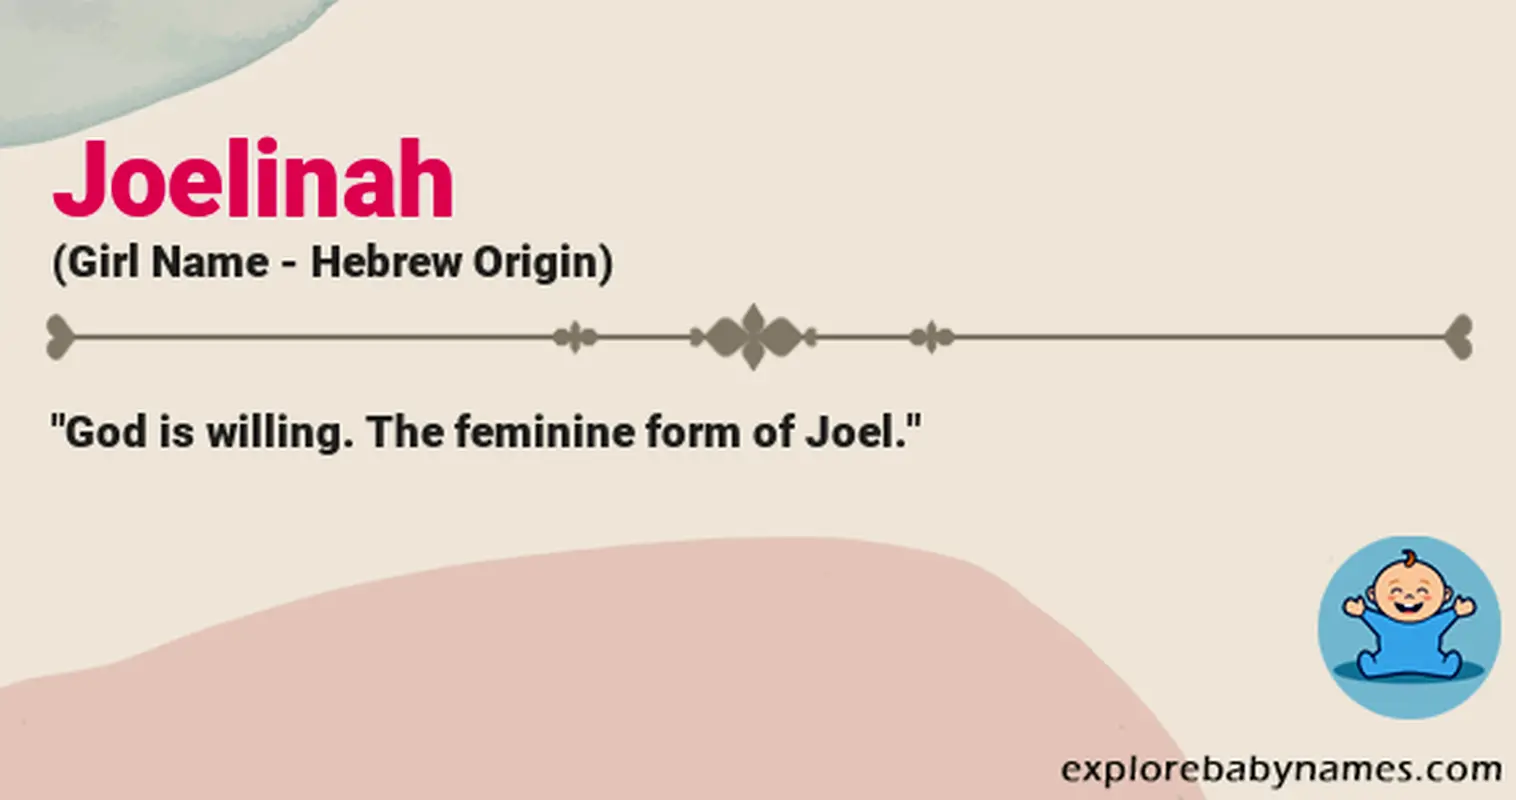 Meaning of Joelinah